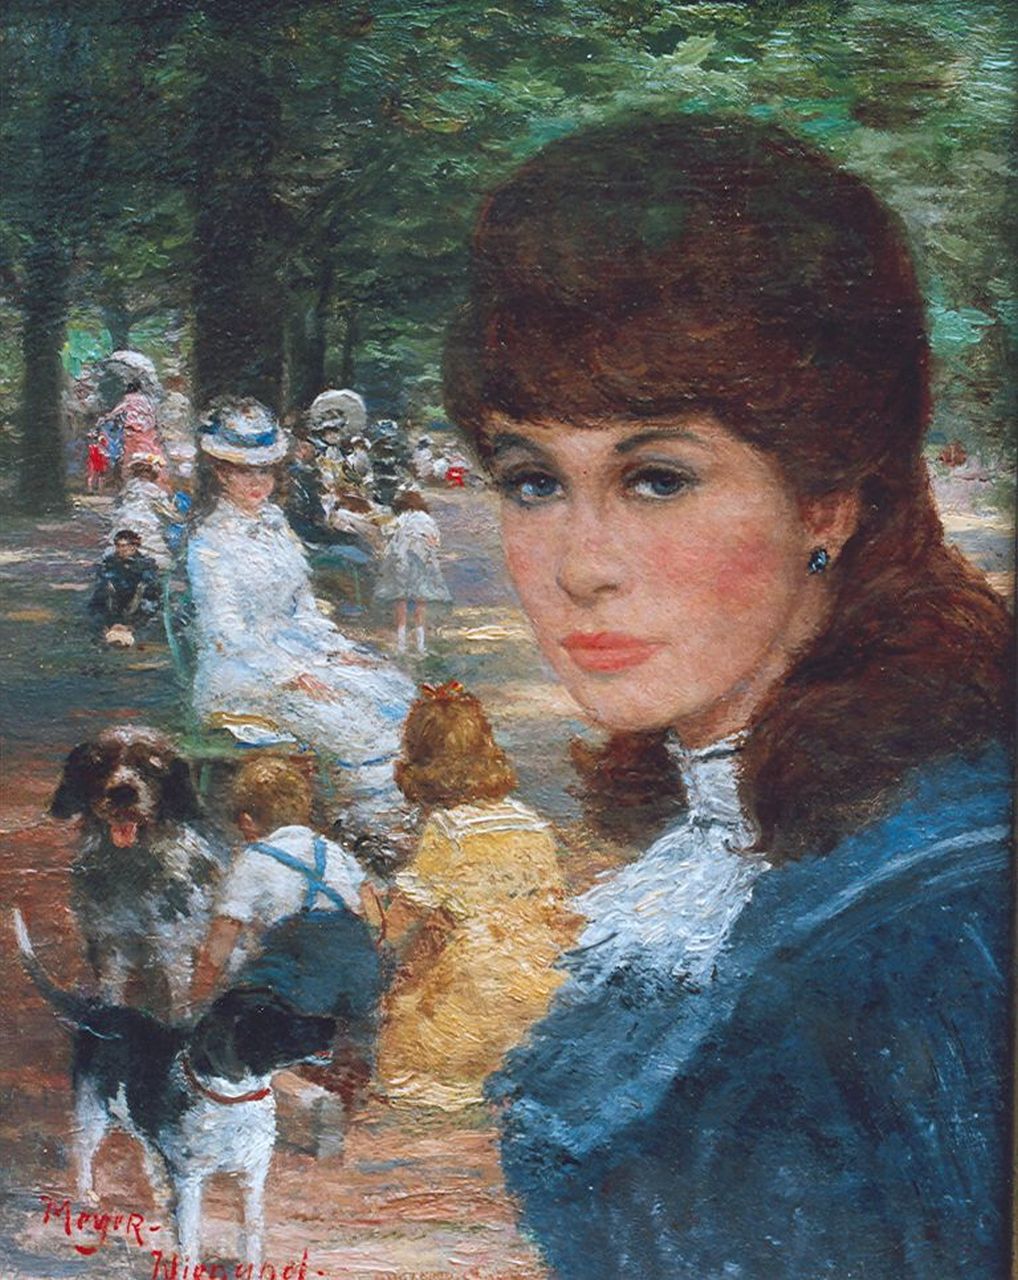 Meyer-Wiegand R.D.  | Rolf Dieter Meyer-Wiegand, An elegant company in a park, oil on panel 18.0 x 14.1 cm, signed l.l.